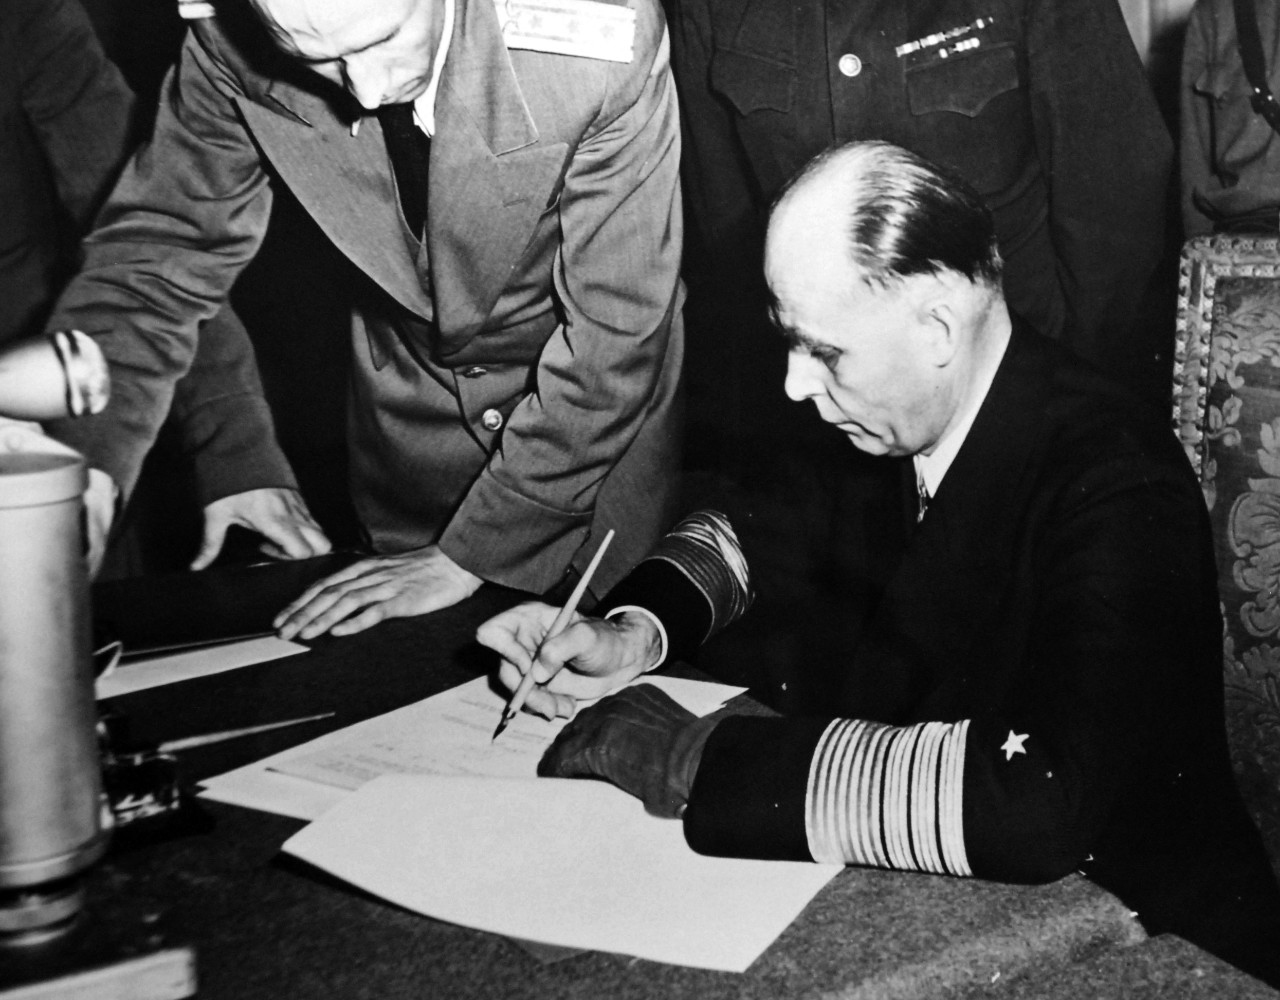 111-SC-27430:   Surrender of Germany, May 9, 1945.  General Admiral Hans-Georg Friedeburg, Commander in Chief of German Fleet, signs the ratified surrender of terms at Russian Headquarters in Berlin, Germany.  Photographed by Lieutenant Moore.   U.S. Army photograph.  Courtesy of the Library of Congress Collection, Lot-8988. (2015/10/16).